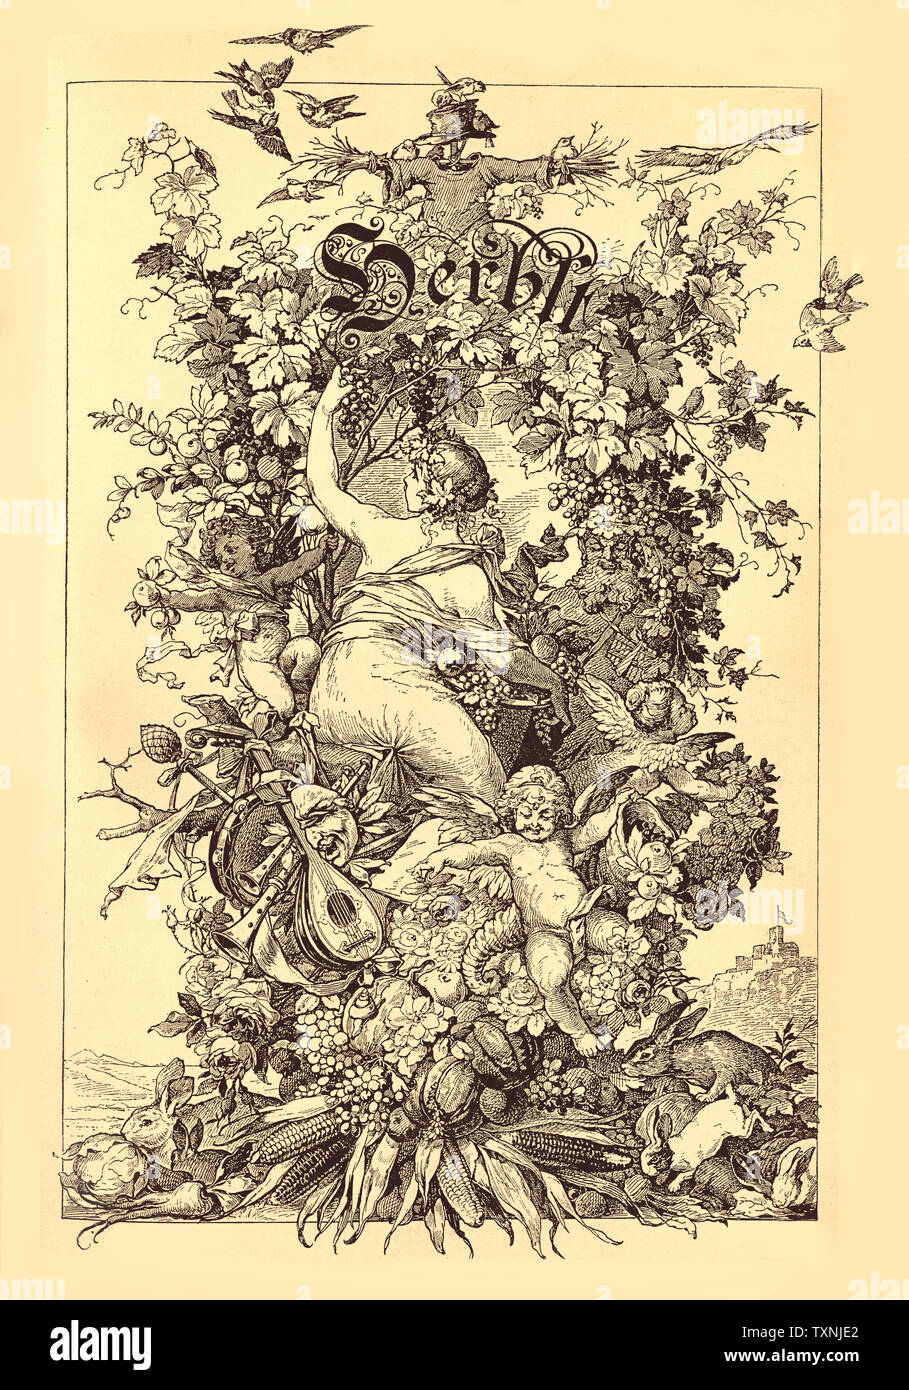 Beautiful vintage frontispiece chapter decoration dedicated to the autumn season with Herbst written in old German characters, a cute girl stealing grapes, puttos, a scarecrow,bunnies and triumph of seasonal plant, flowers and crops Stock Photo